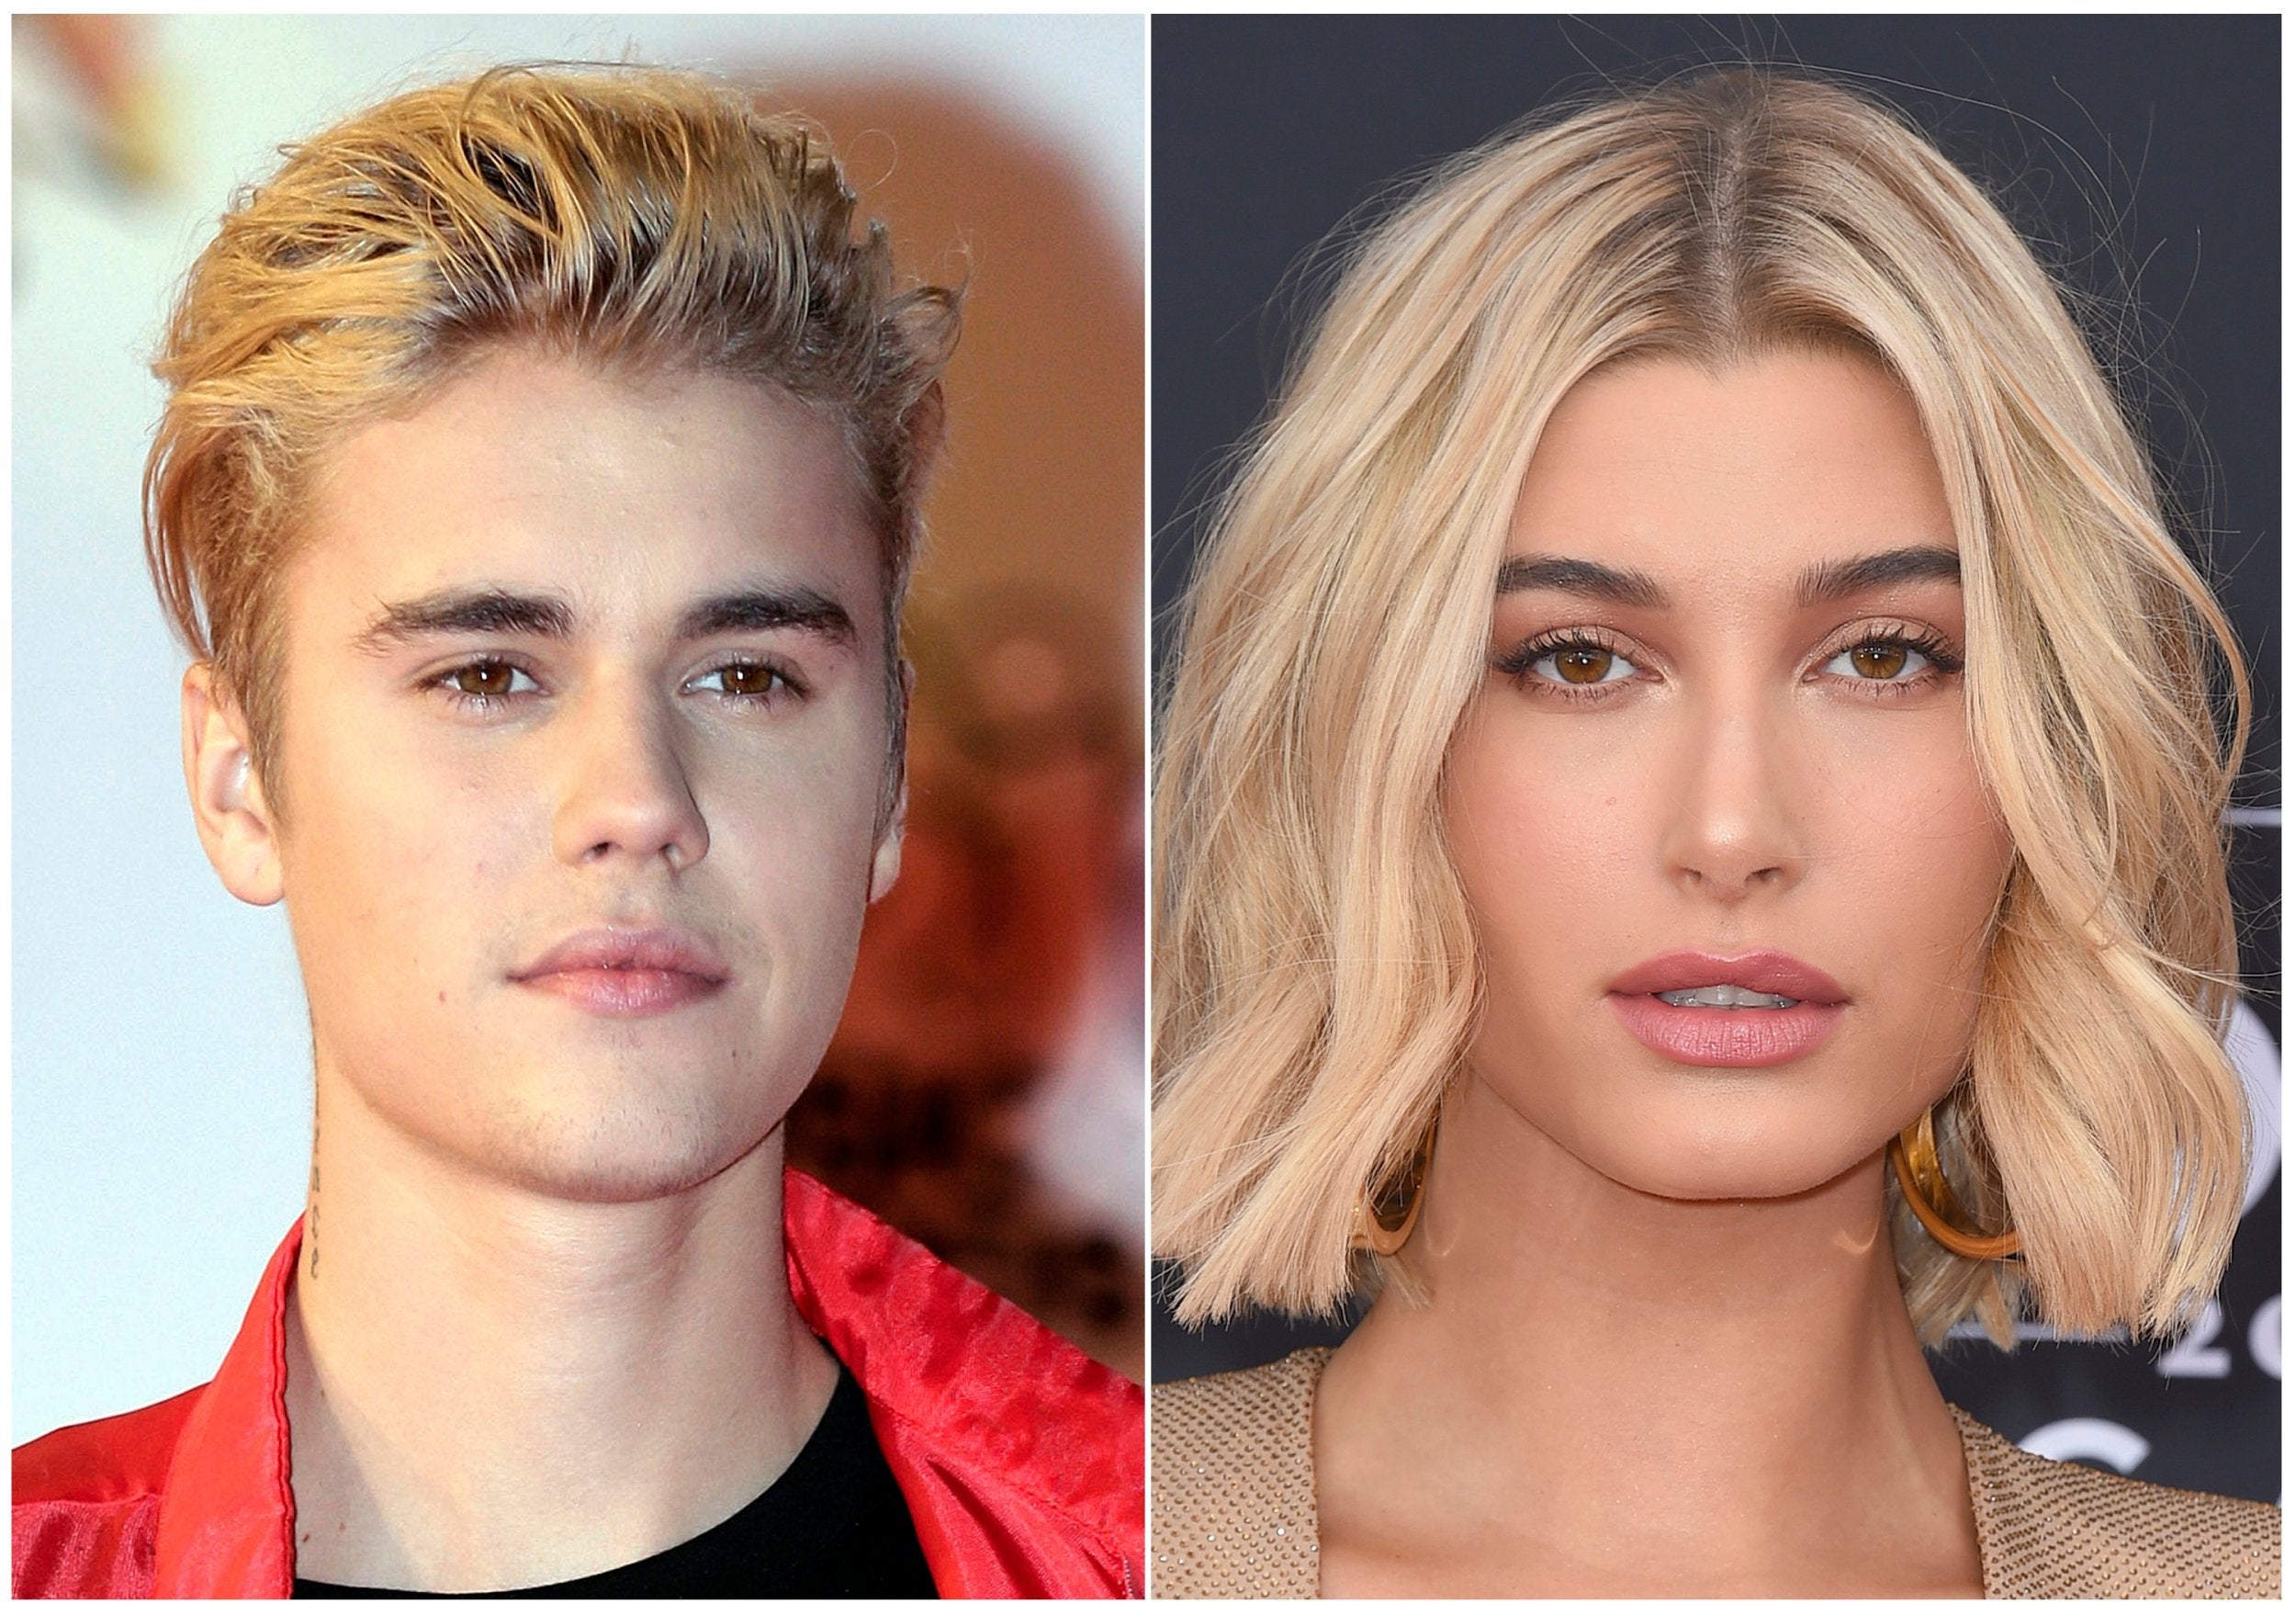 Justin Bieber is engaged to Hailey Baldwin